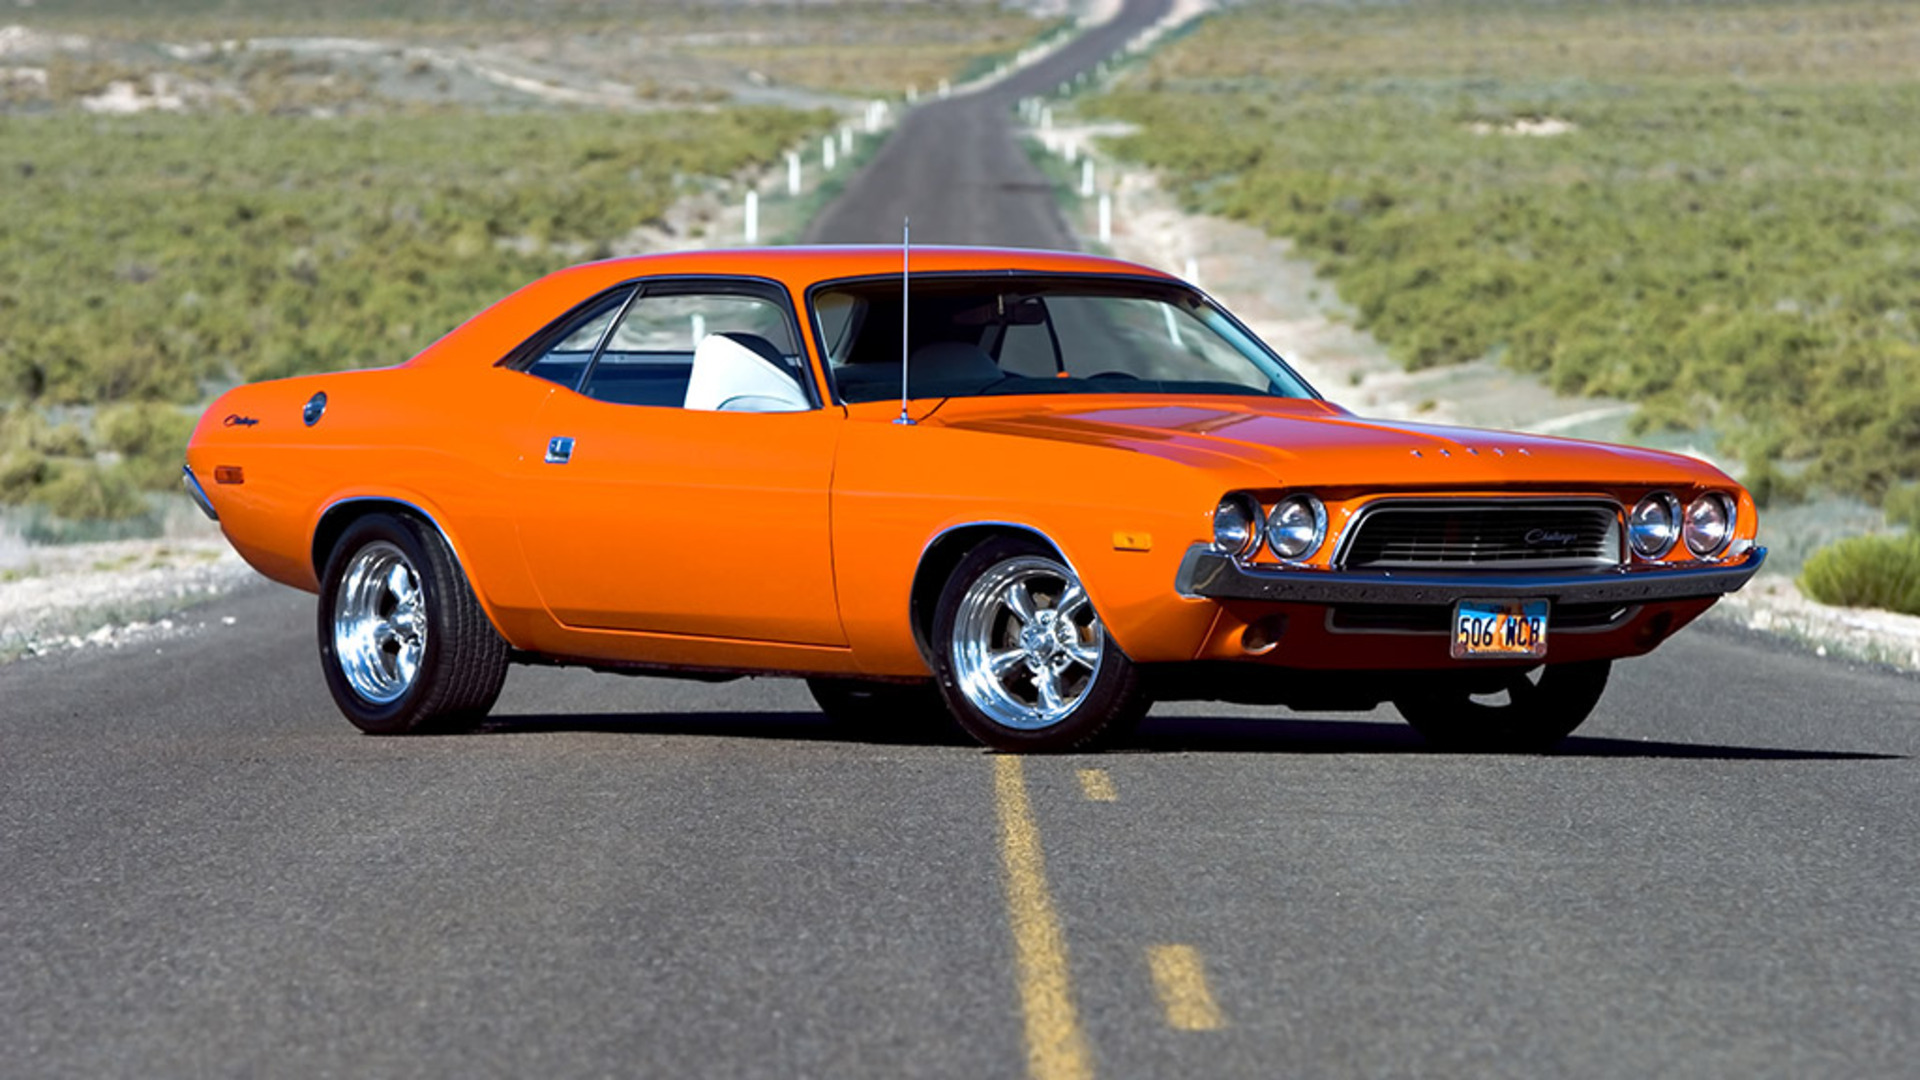 Muscle  Wallpapers on Muscle Cars Dodge Challenger Hd Wallpaper   Cars   Trucks   782512